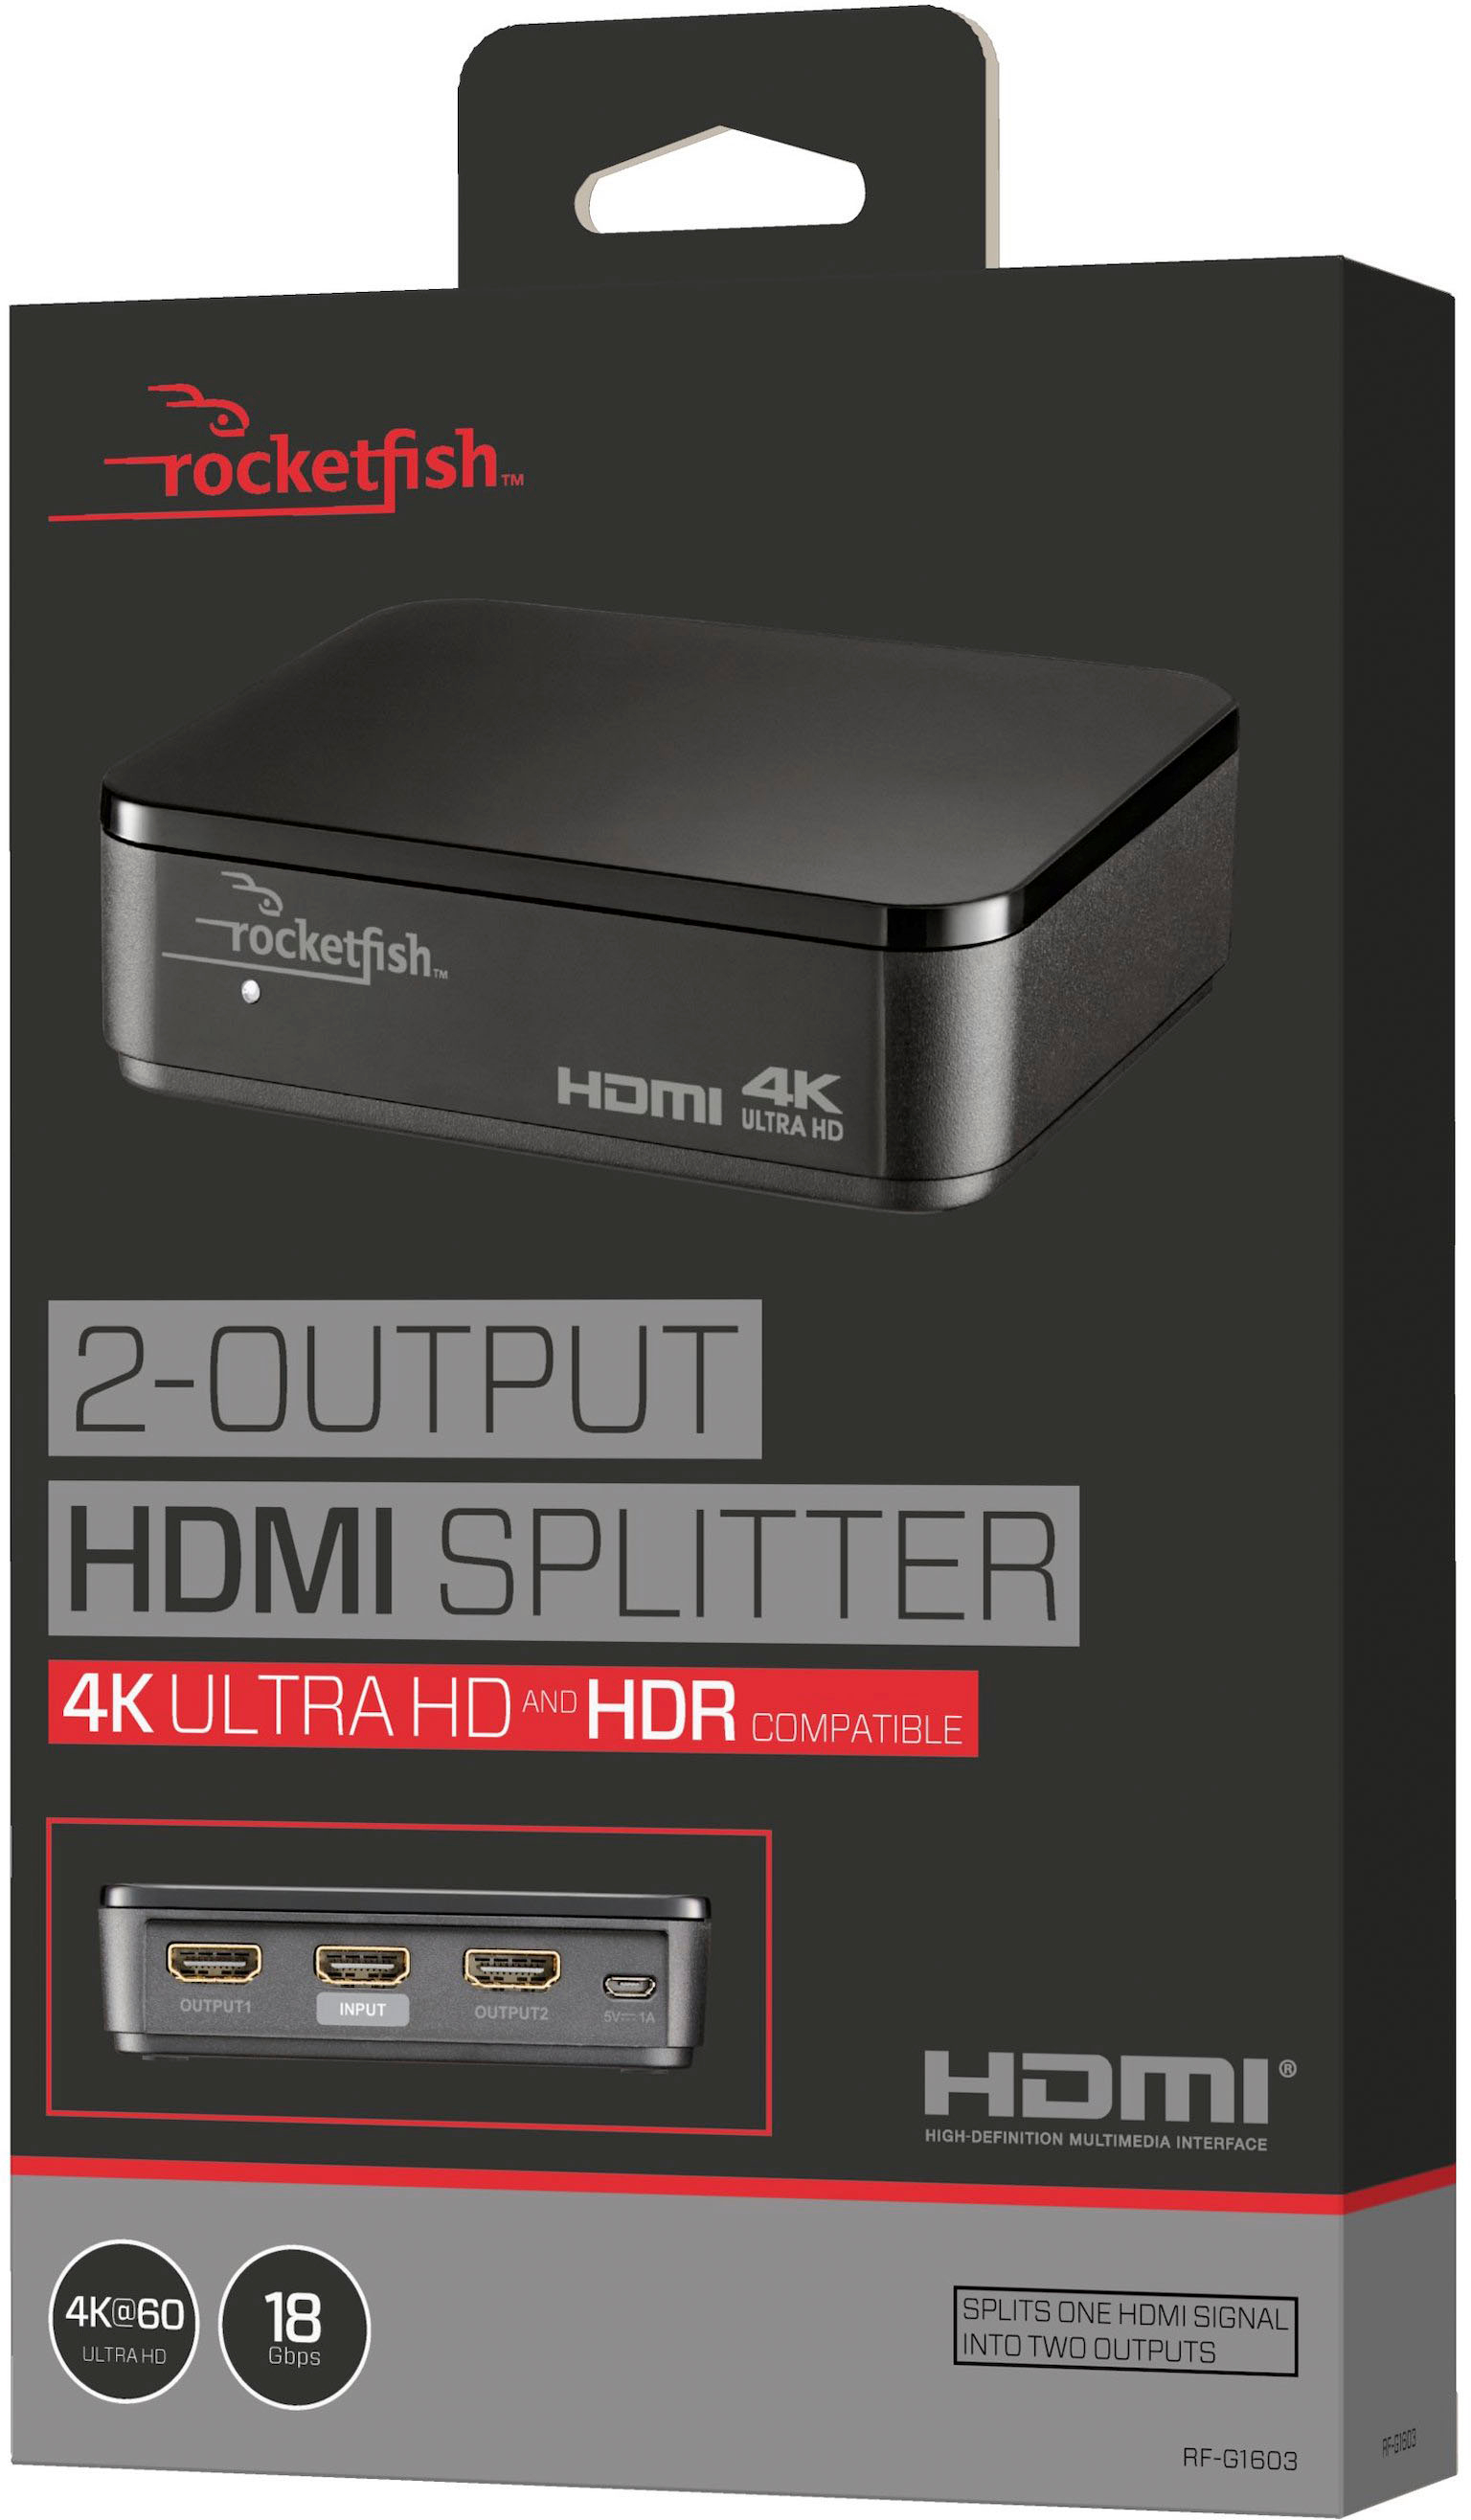 tyve Diktat abort Rocketfish™ 2-Output HDMI Splitter with 4K at 60Hz and HDR Pass-Through  Black RF-G1603 - Best Buy